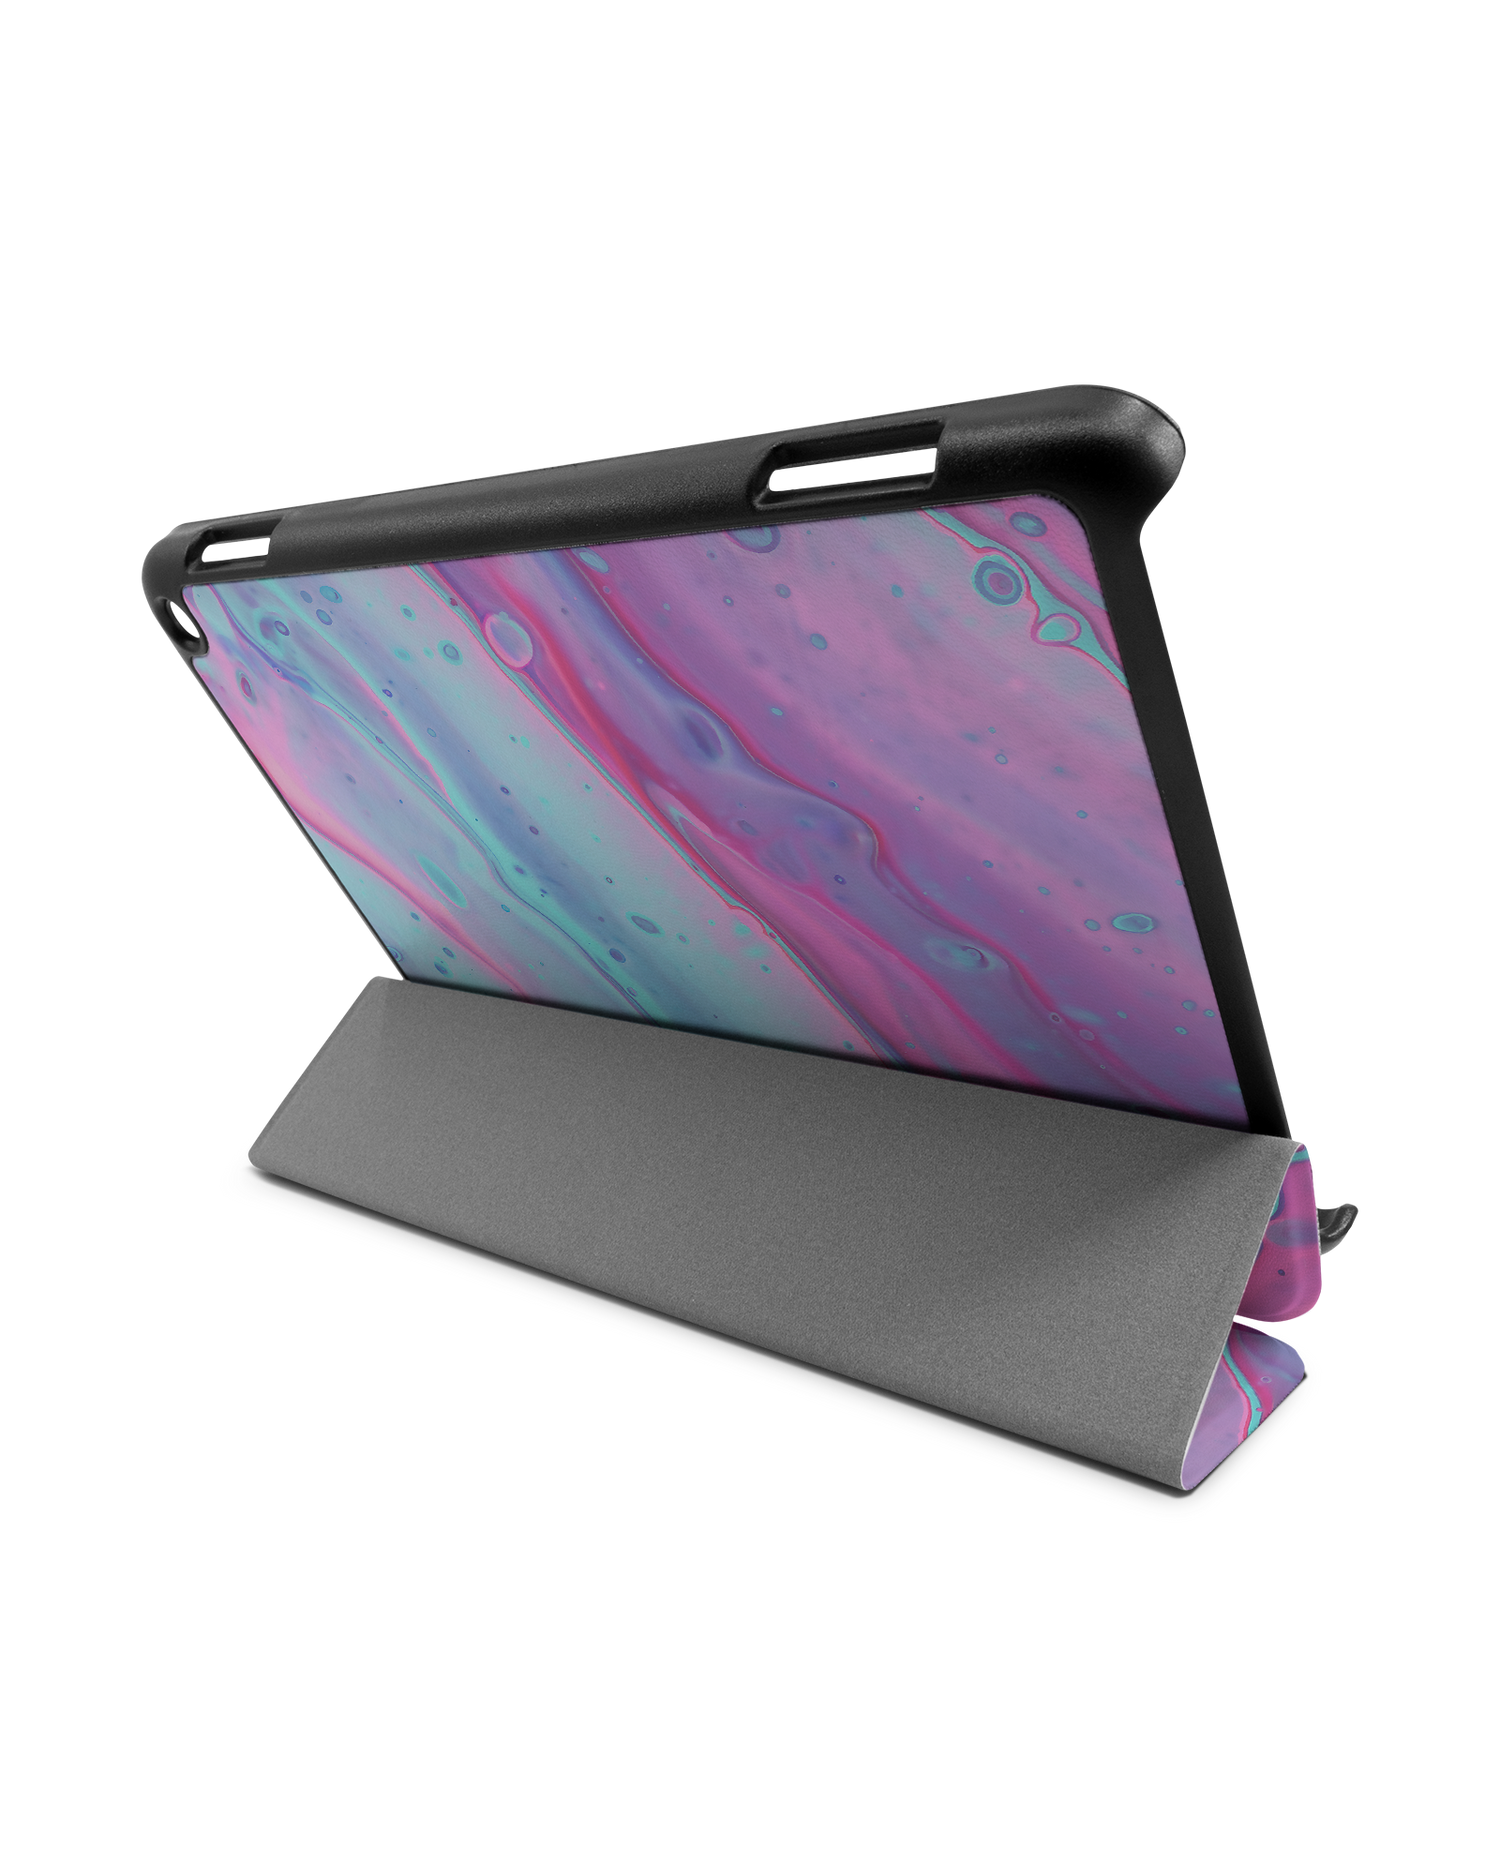 Wavey Tablet Smart Case for Amazon Fire HD 8 (2022), Amazon Fire HD 8 Plus (2022), Amazon Fire HD 8 (2020), Amazon Fire HD 8 Plus (2020): Used as Stand